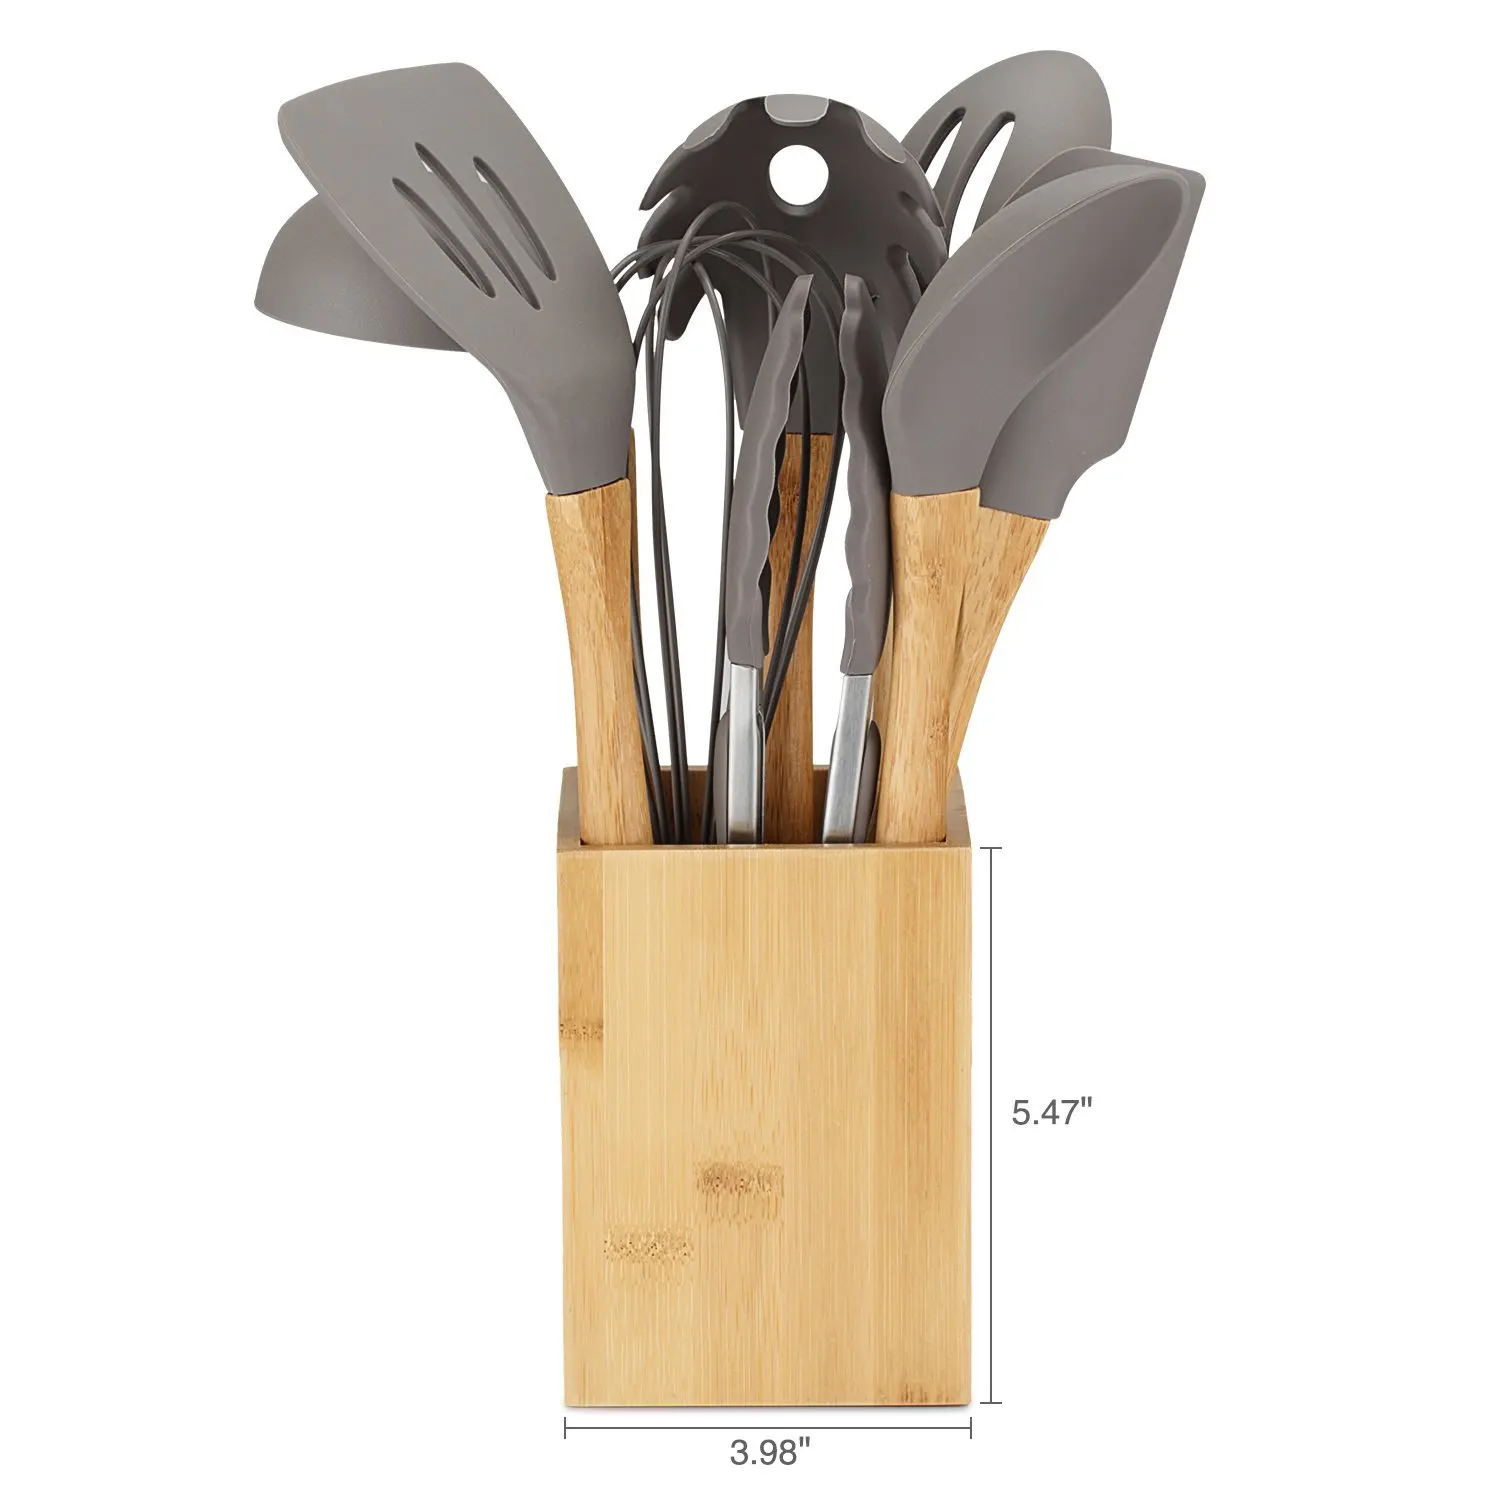 2019 hot sale 9 pieces  food standard  kitchen wooden and bamboo utensil set